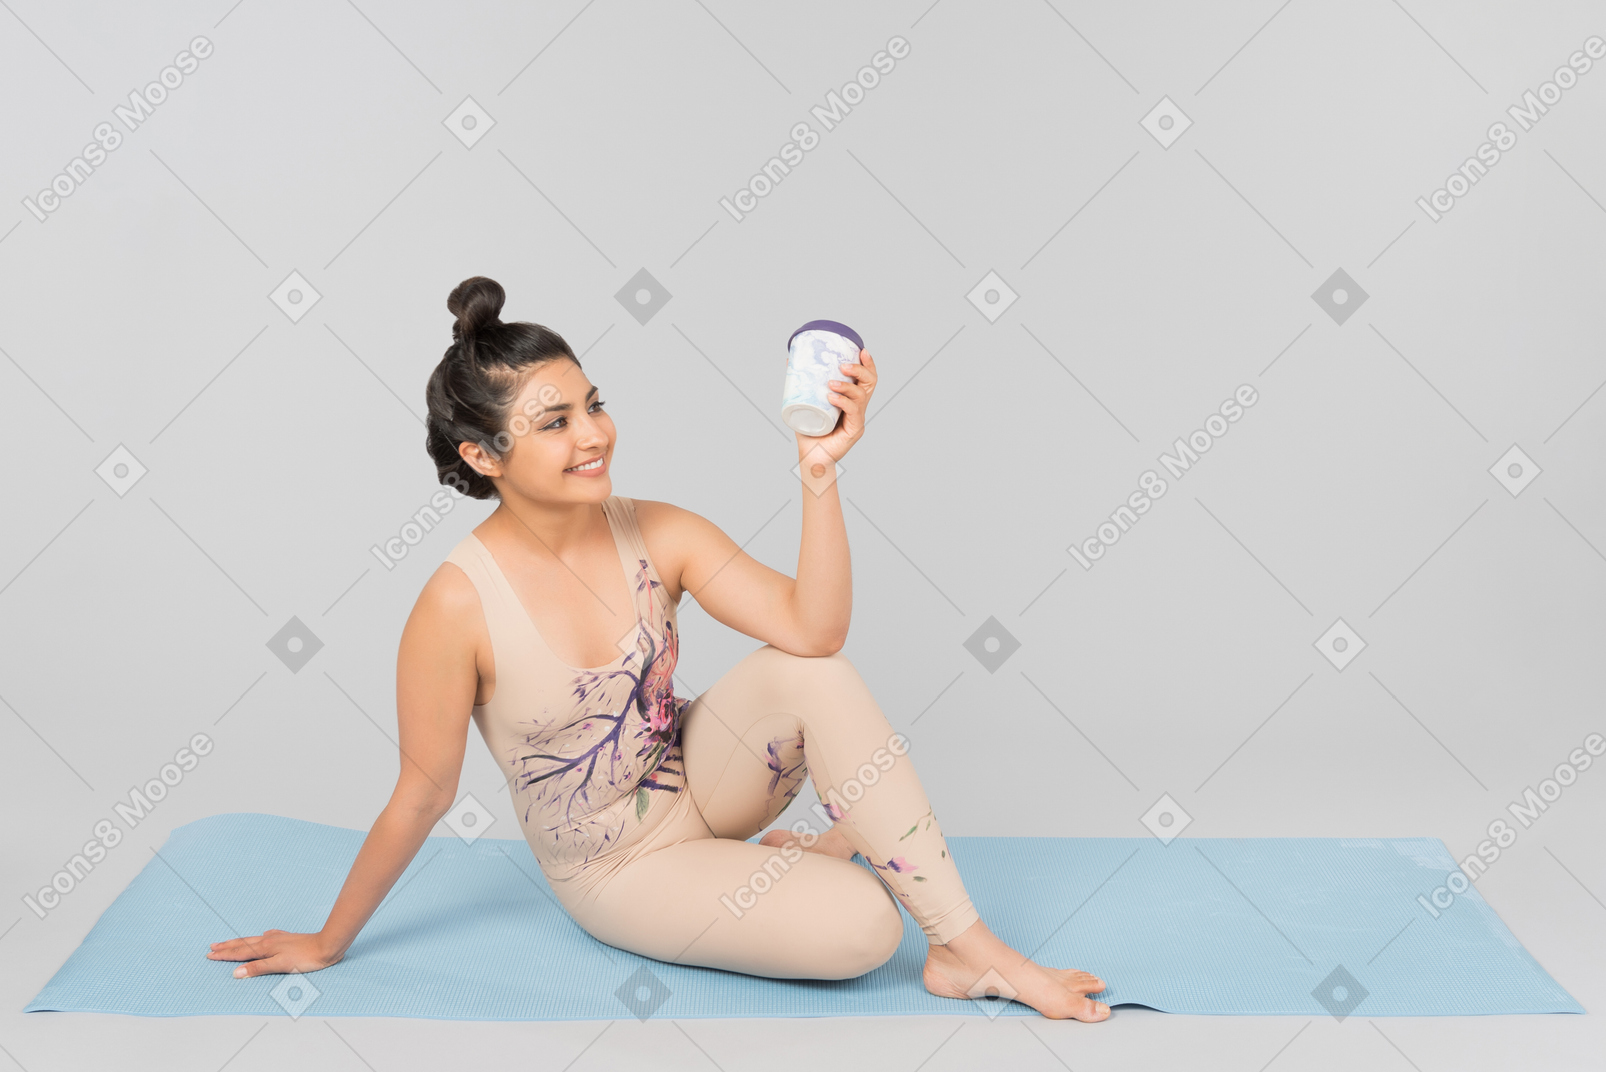 Smiling young indian gymnast sitting on yoga mat and holding cup of coffee